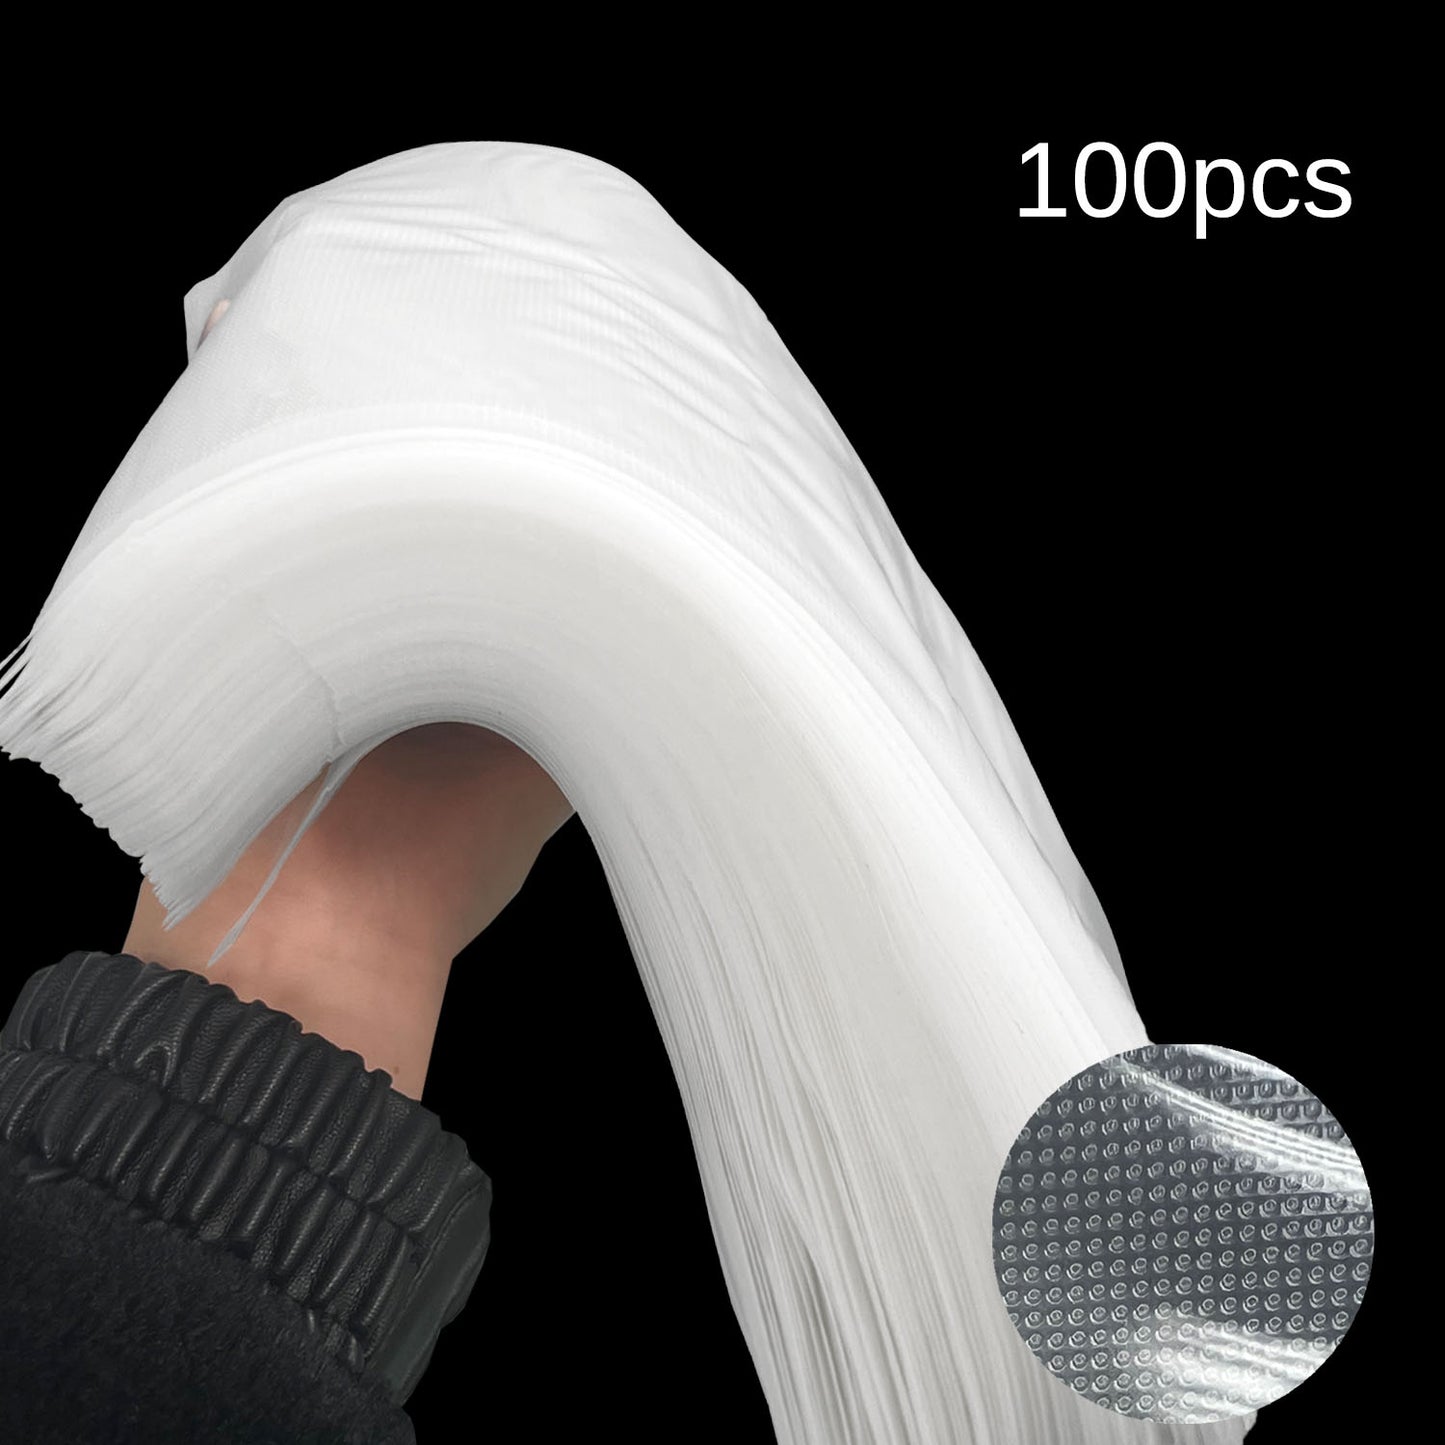 100pcs 8x12 inches Clear Vacuum Bags; $0.20/pc